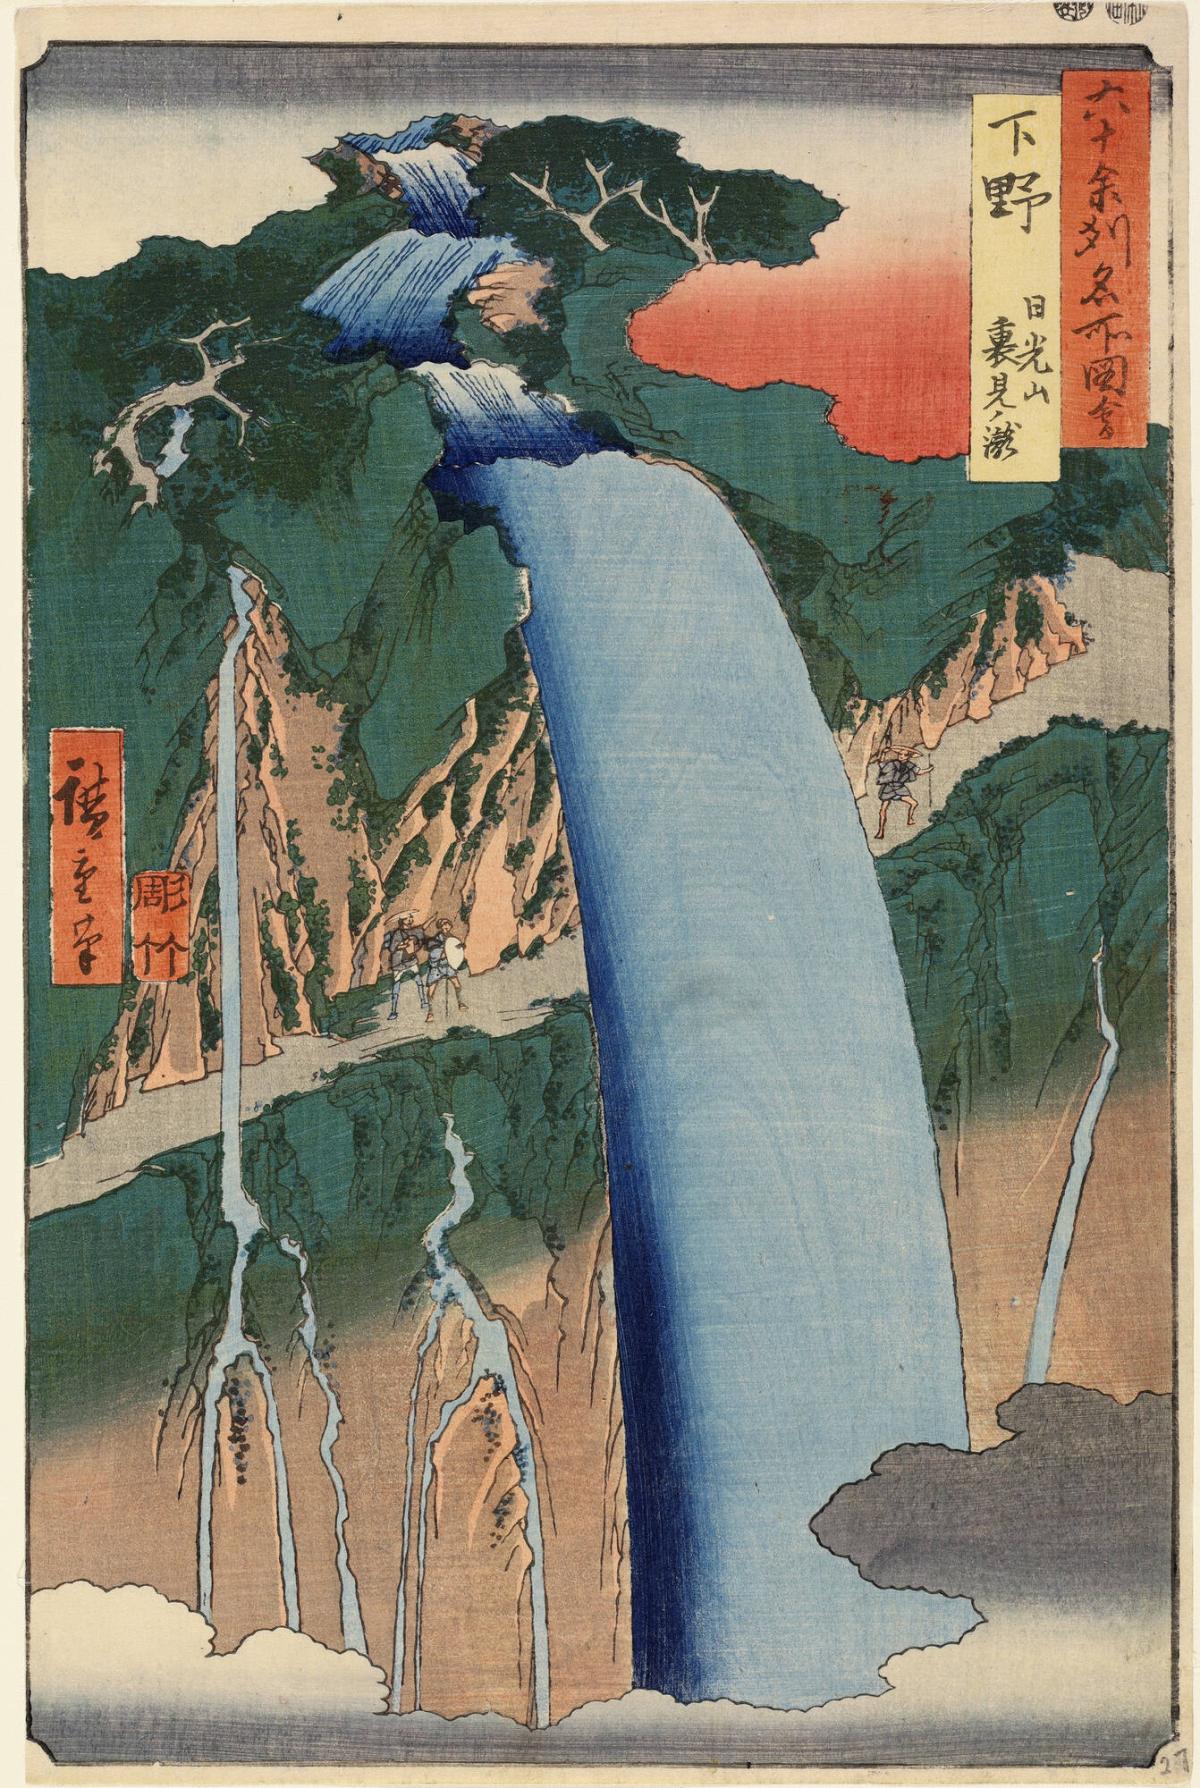 The Back-view Waterfall in the Nikko Mountains in Shimozuke Province, no. 27 from the series Pictures of Famous Places in the Sixty-odd Provinces